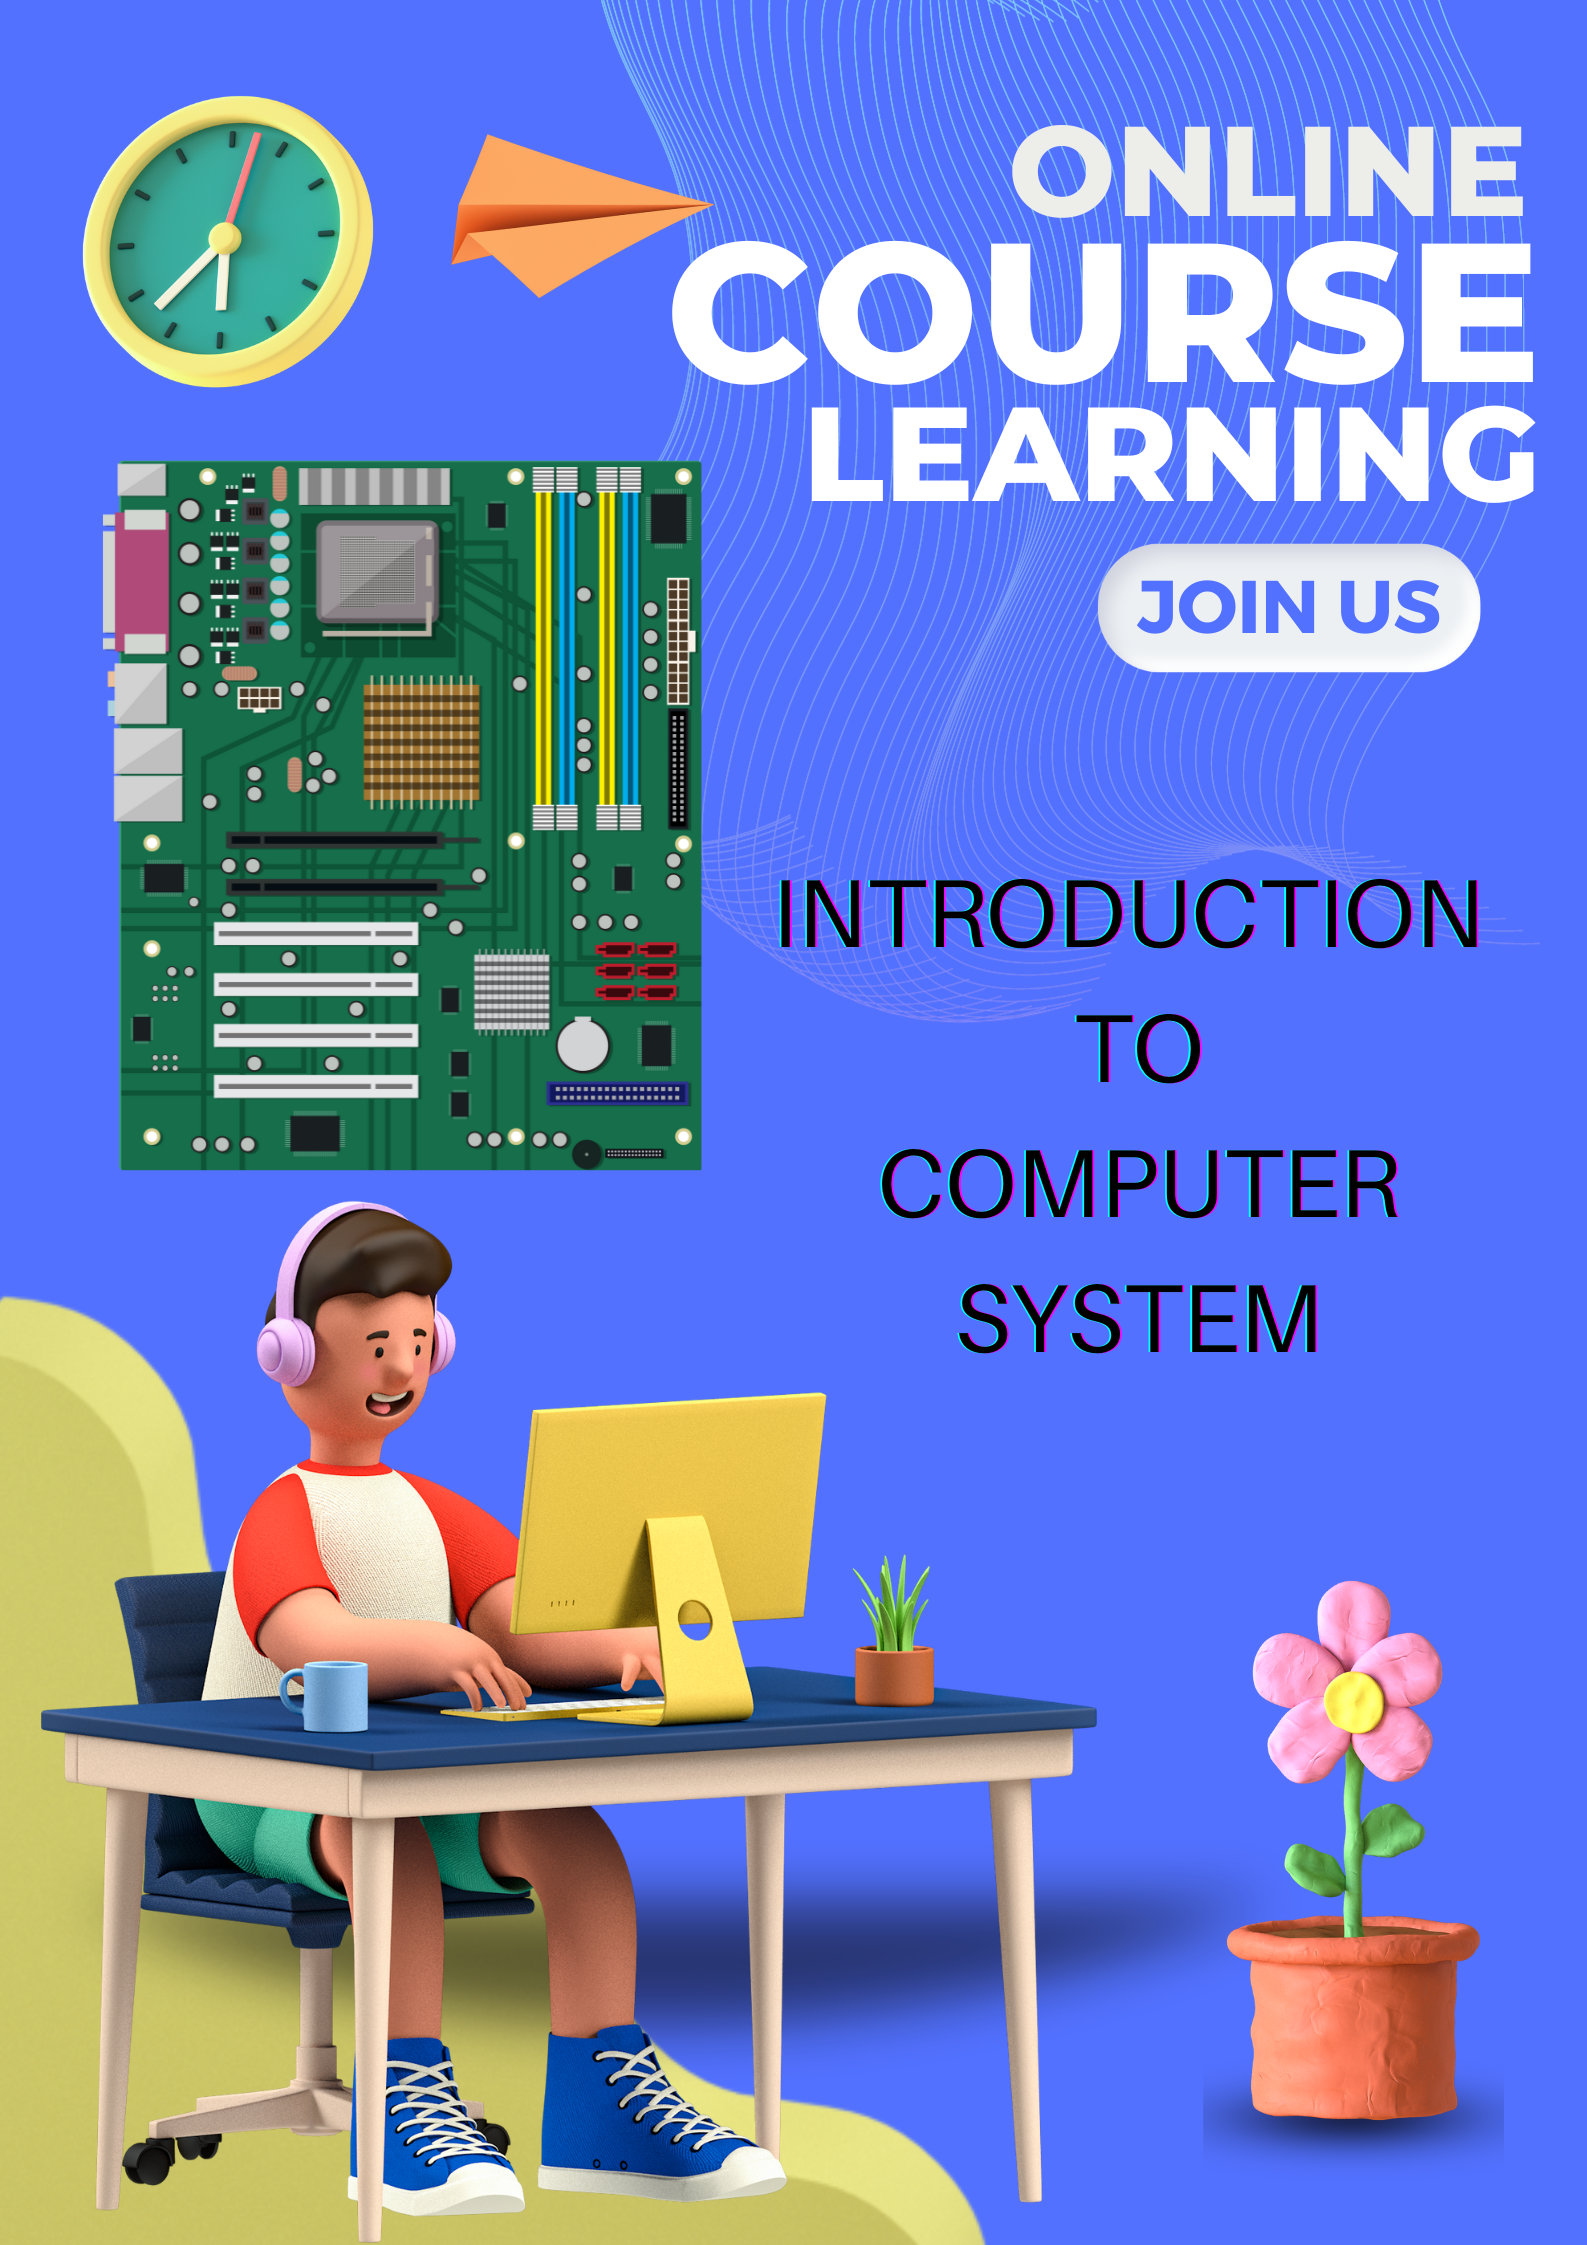 PROMOTION FOR INTRODUCTION TO COMPUTER SYSTEM